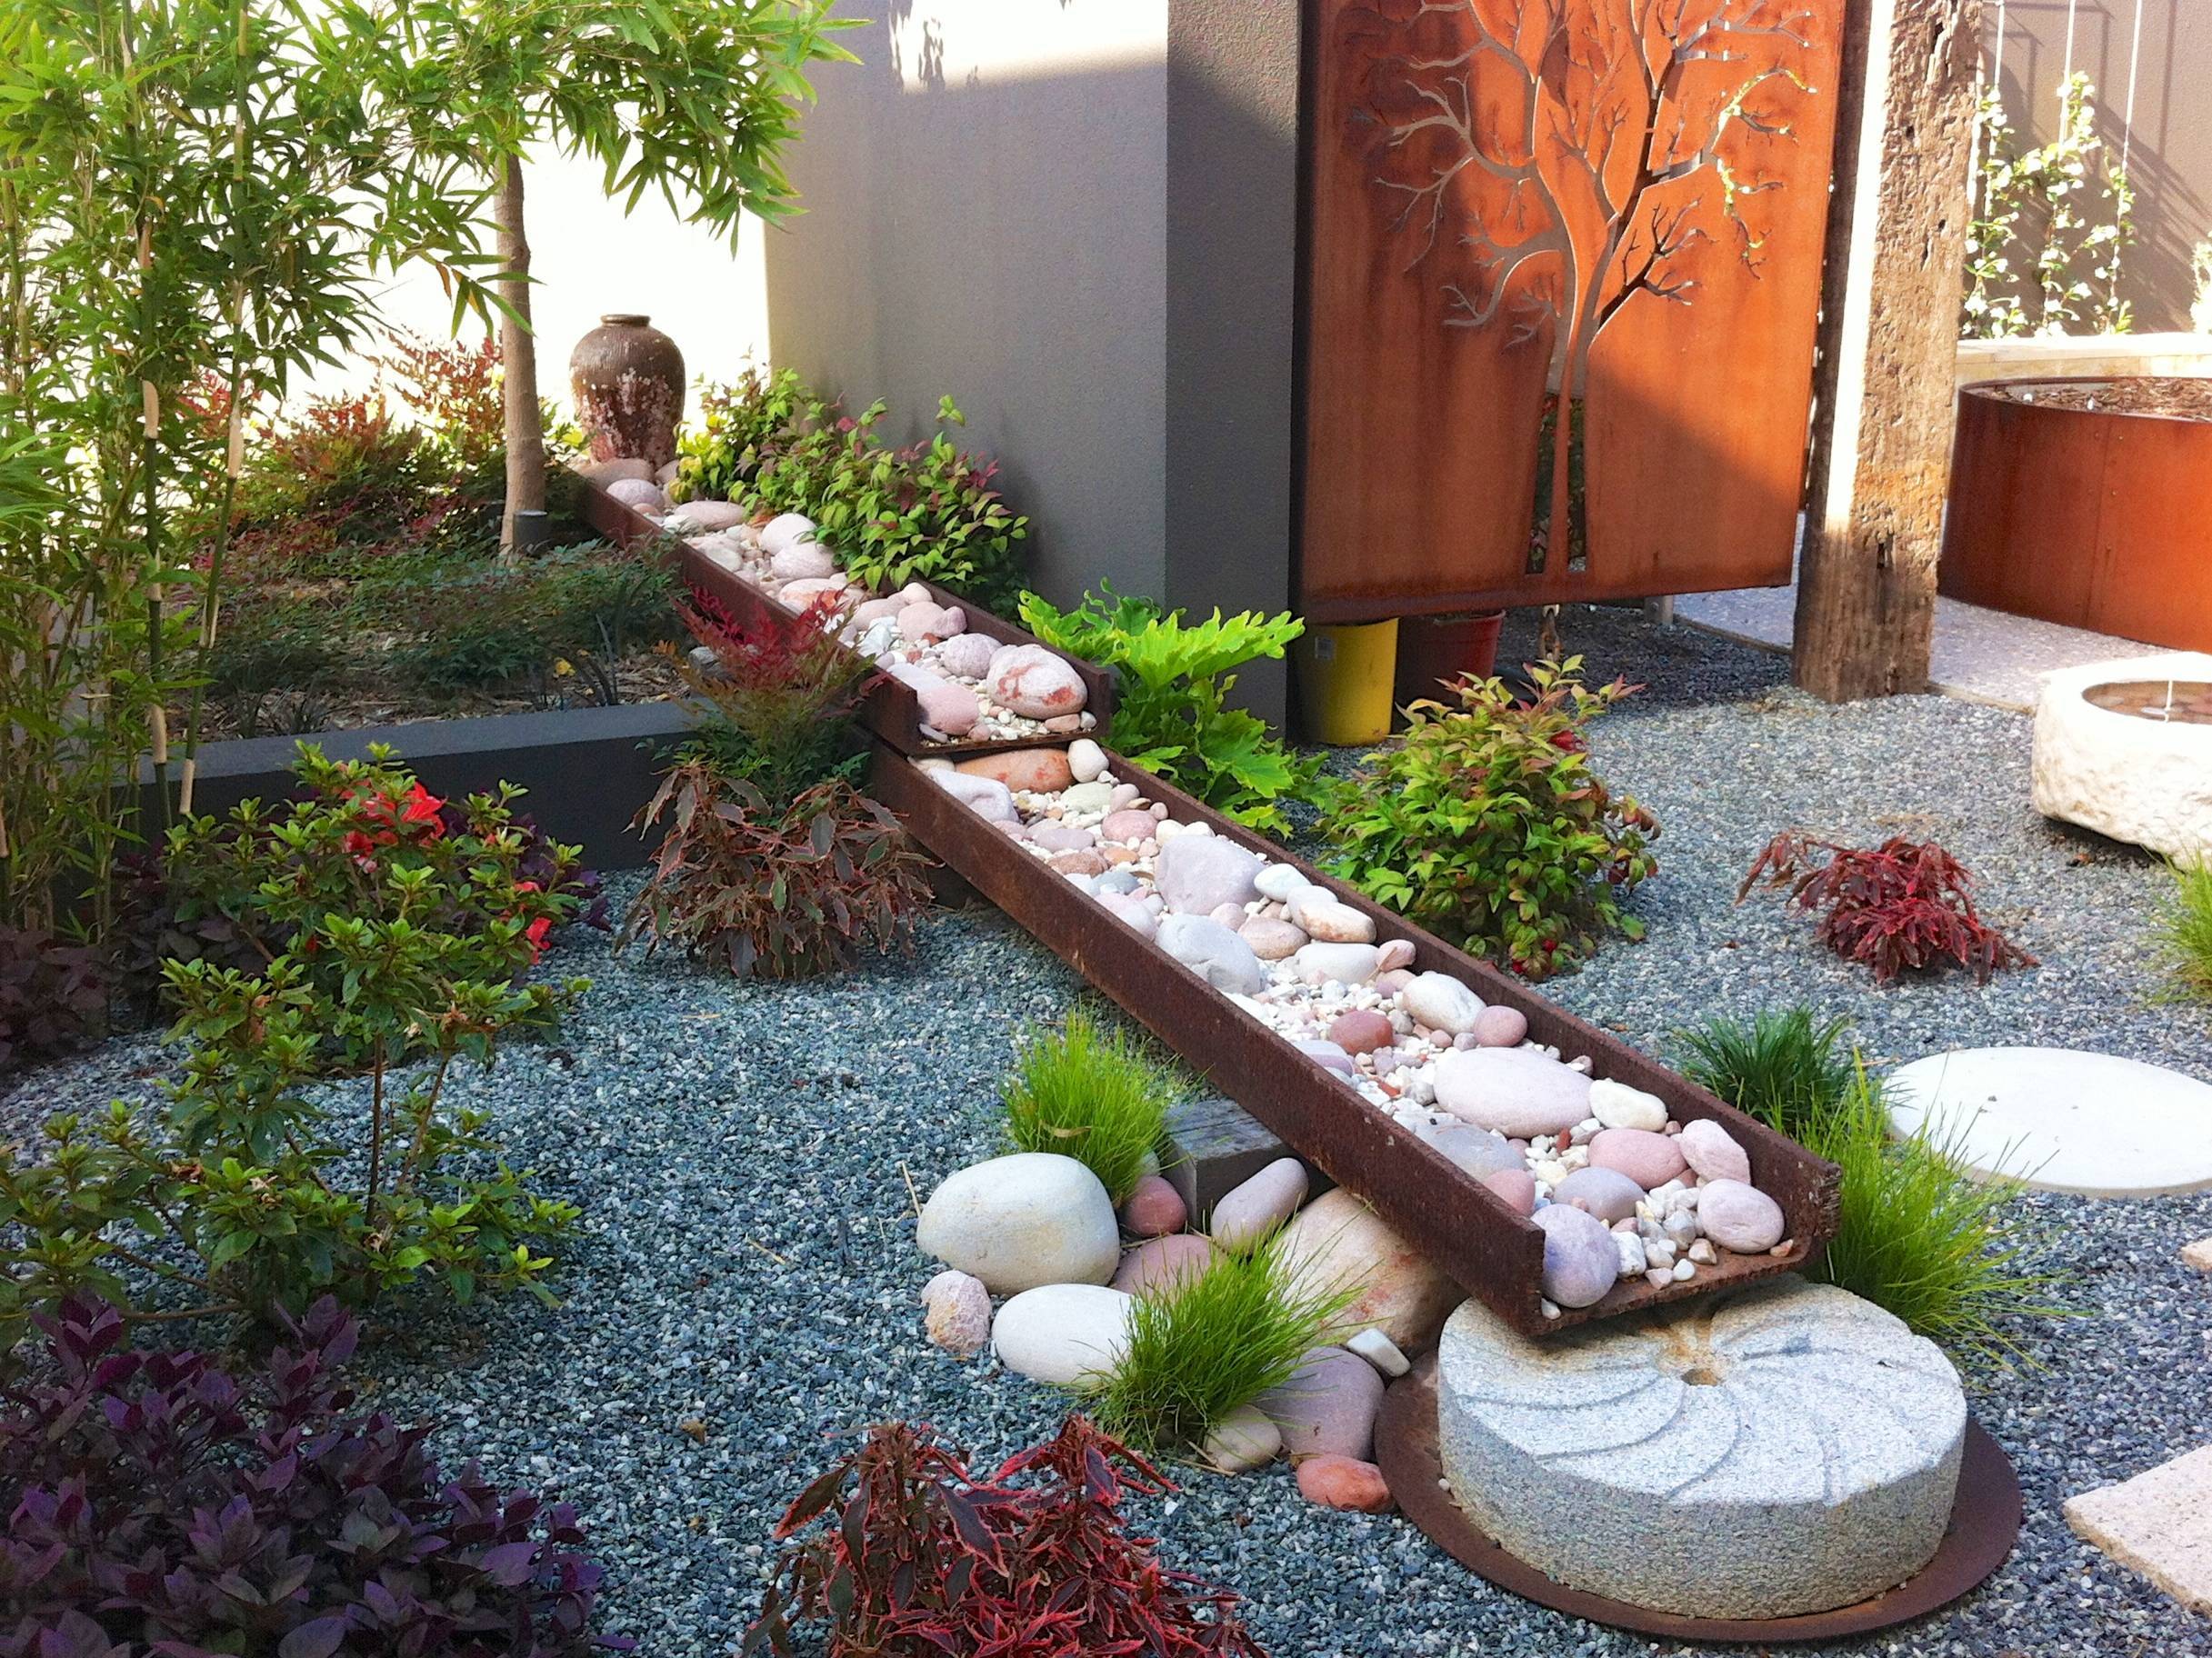 Polished Pebbles used as a Decorative Feature for Garden